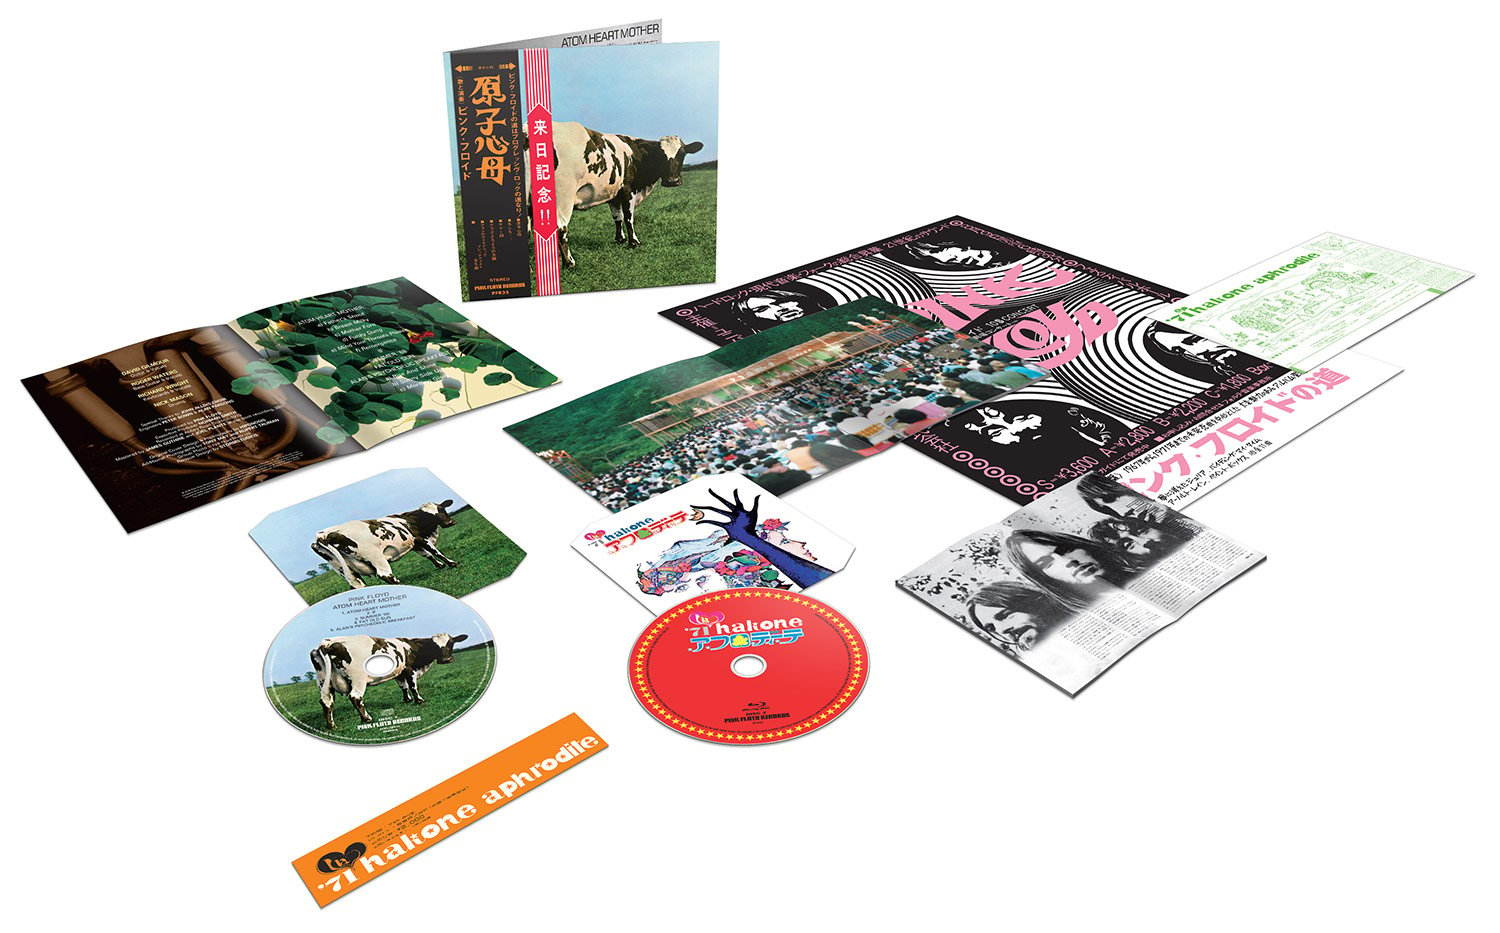 Pink Floyd ‘Atom Heart Mother’ On CD + Blu-ray Special Edition